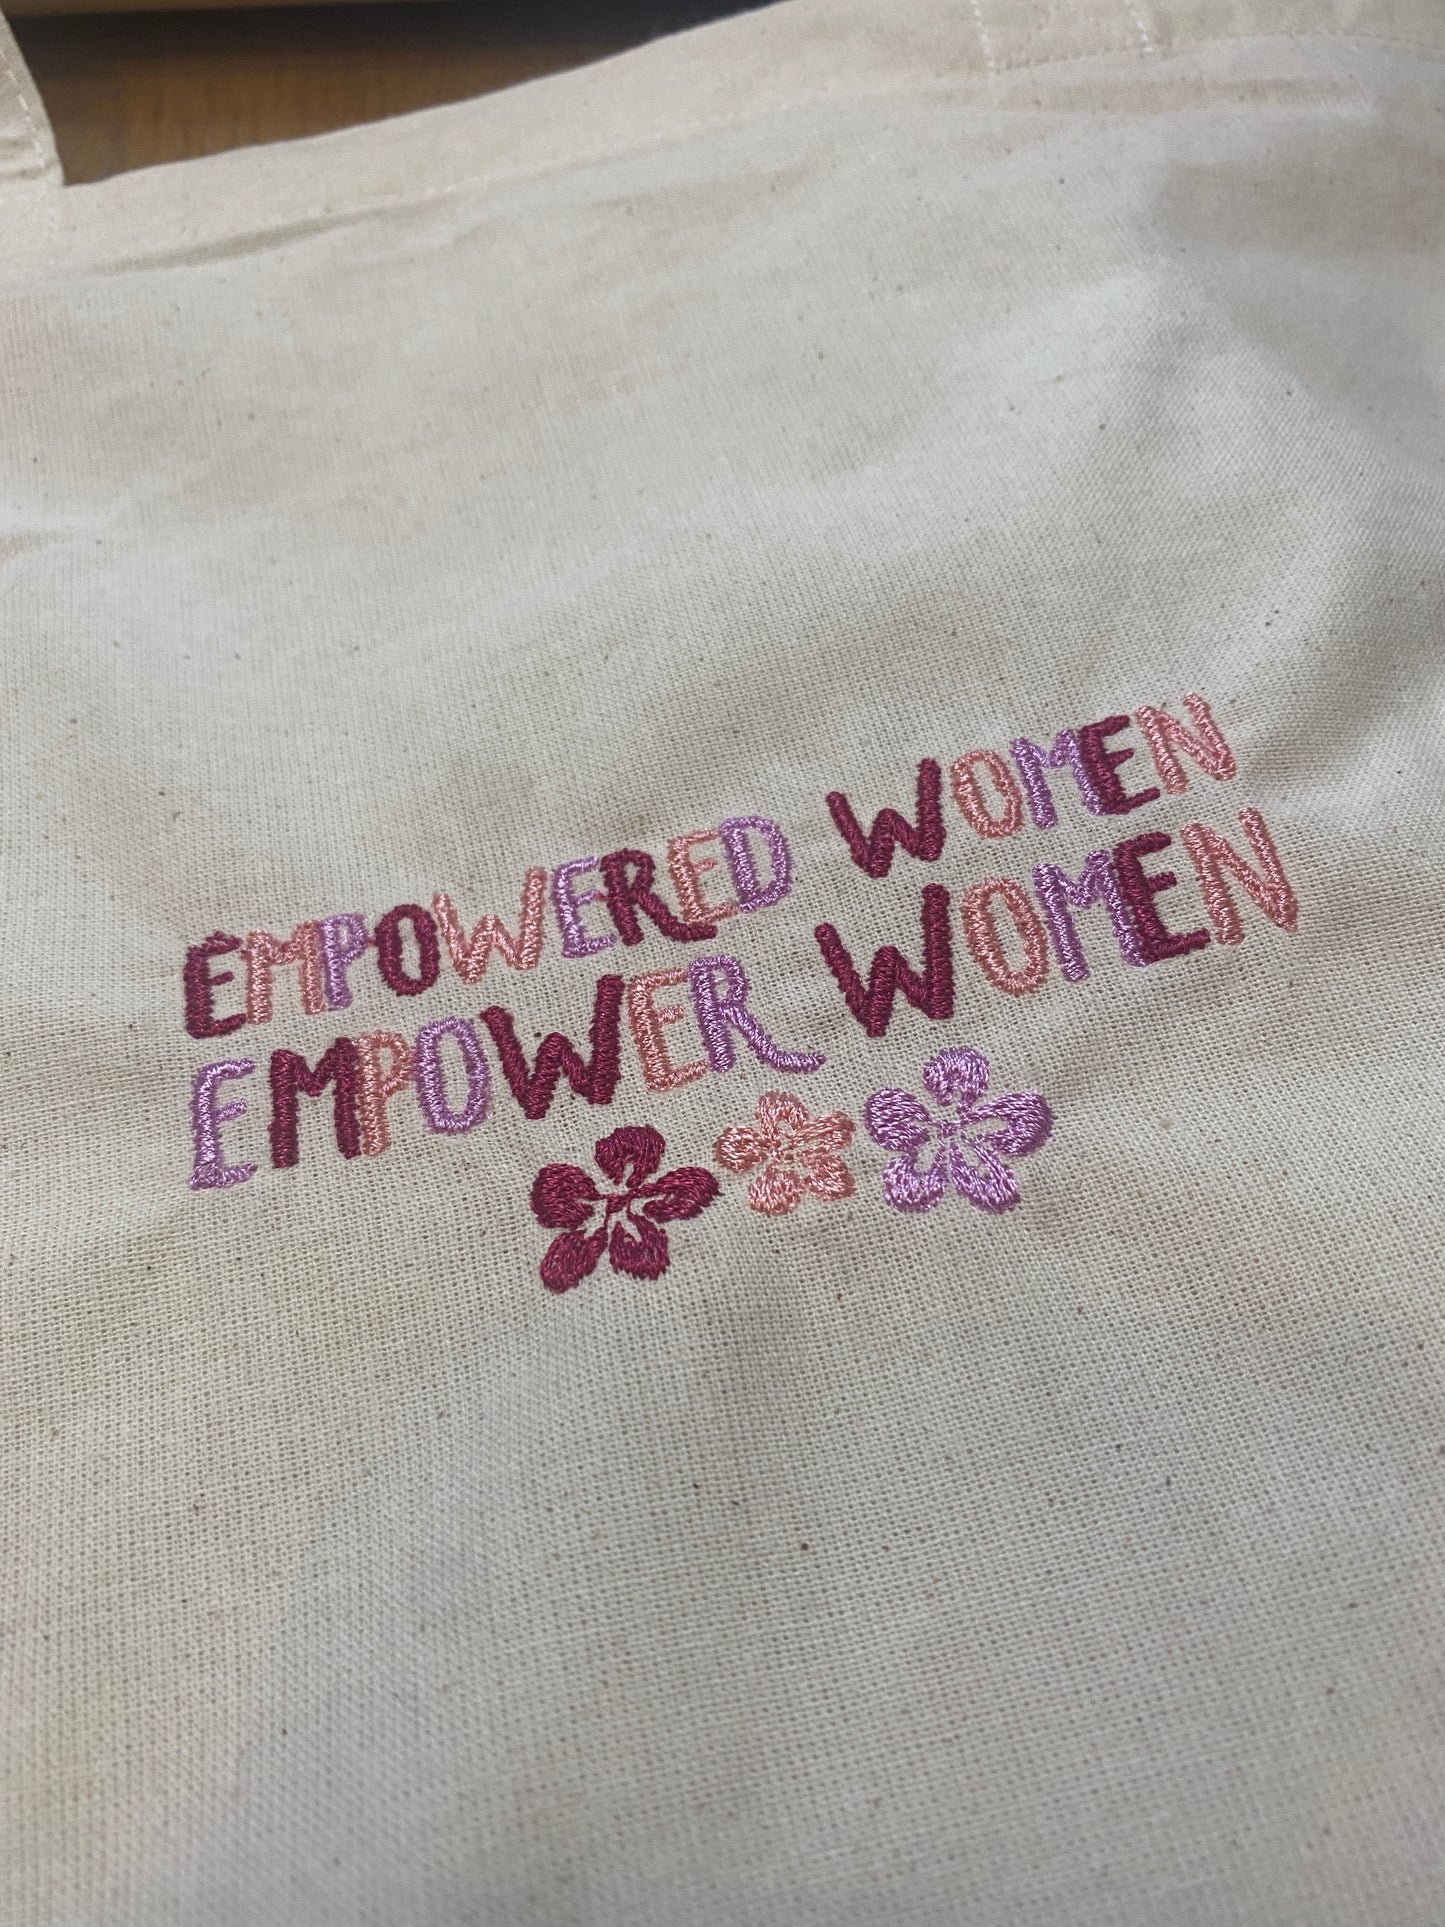 Empowered Woman Empower Woman Tote Bag